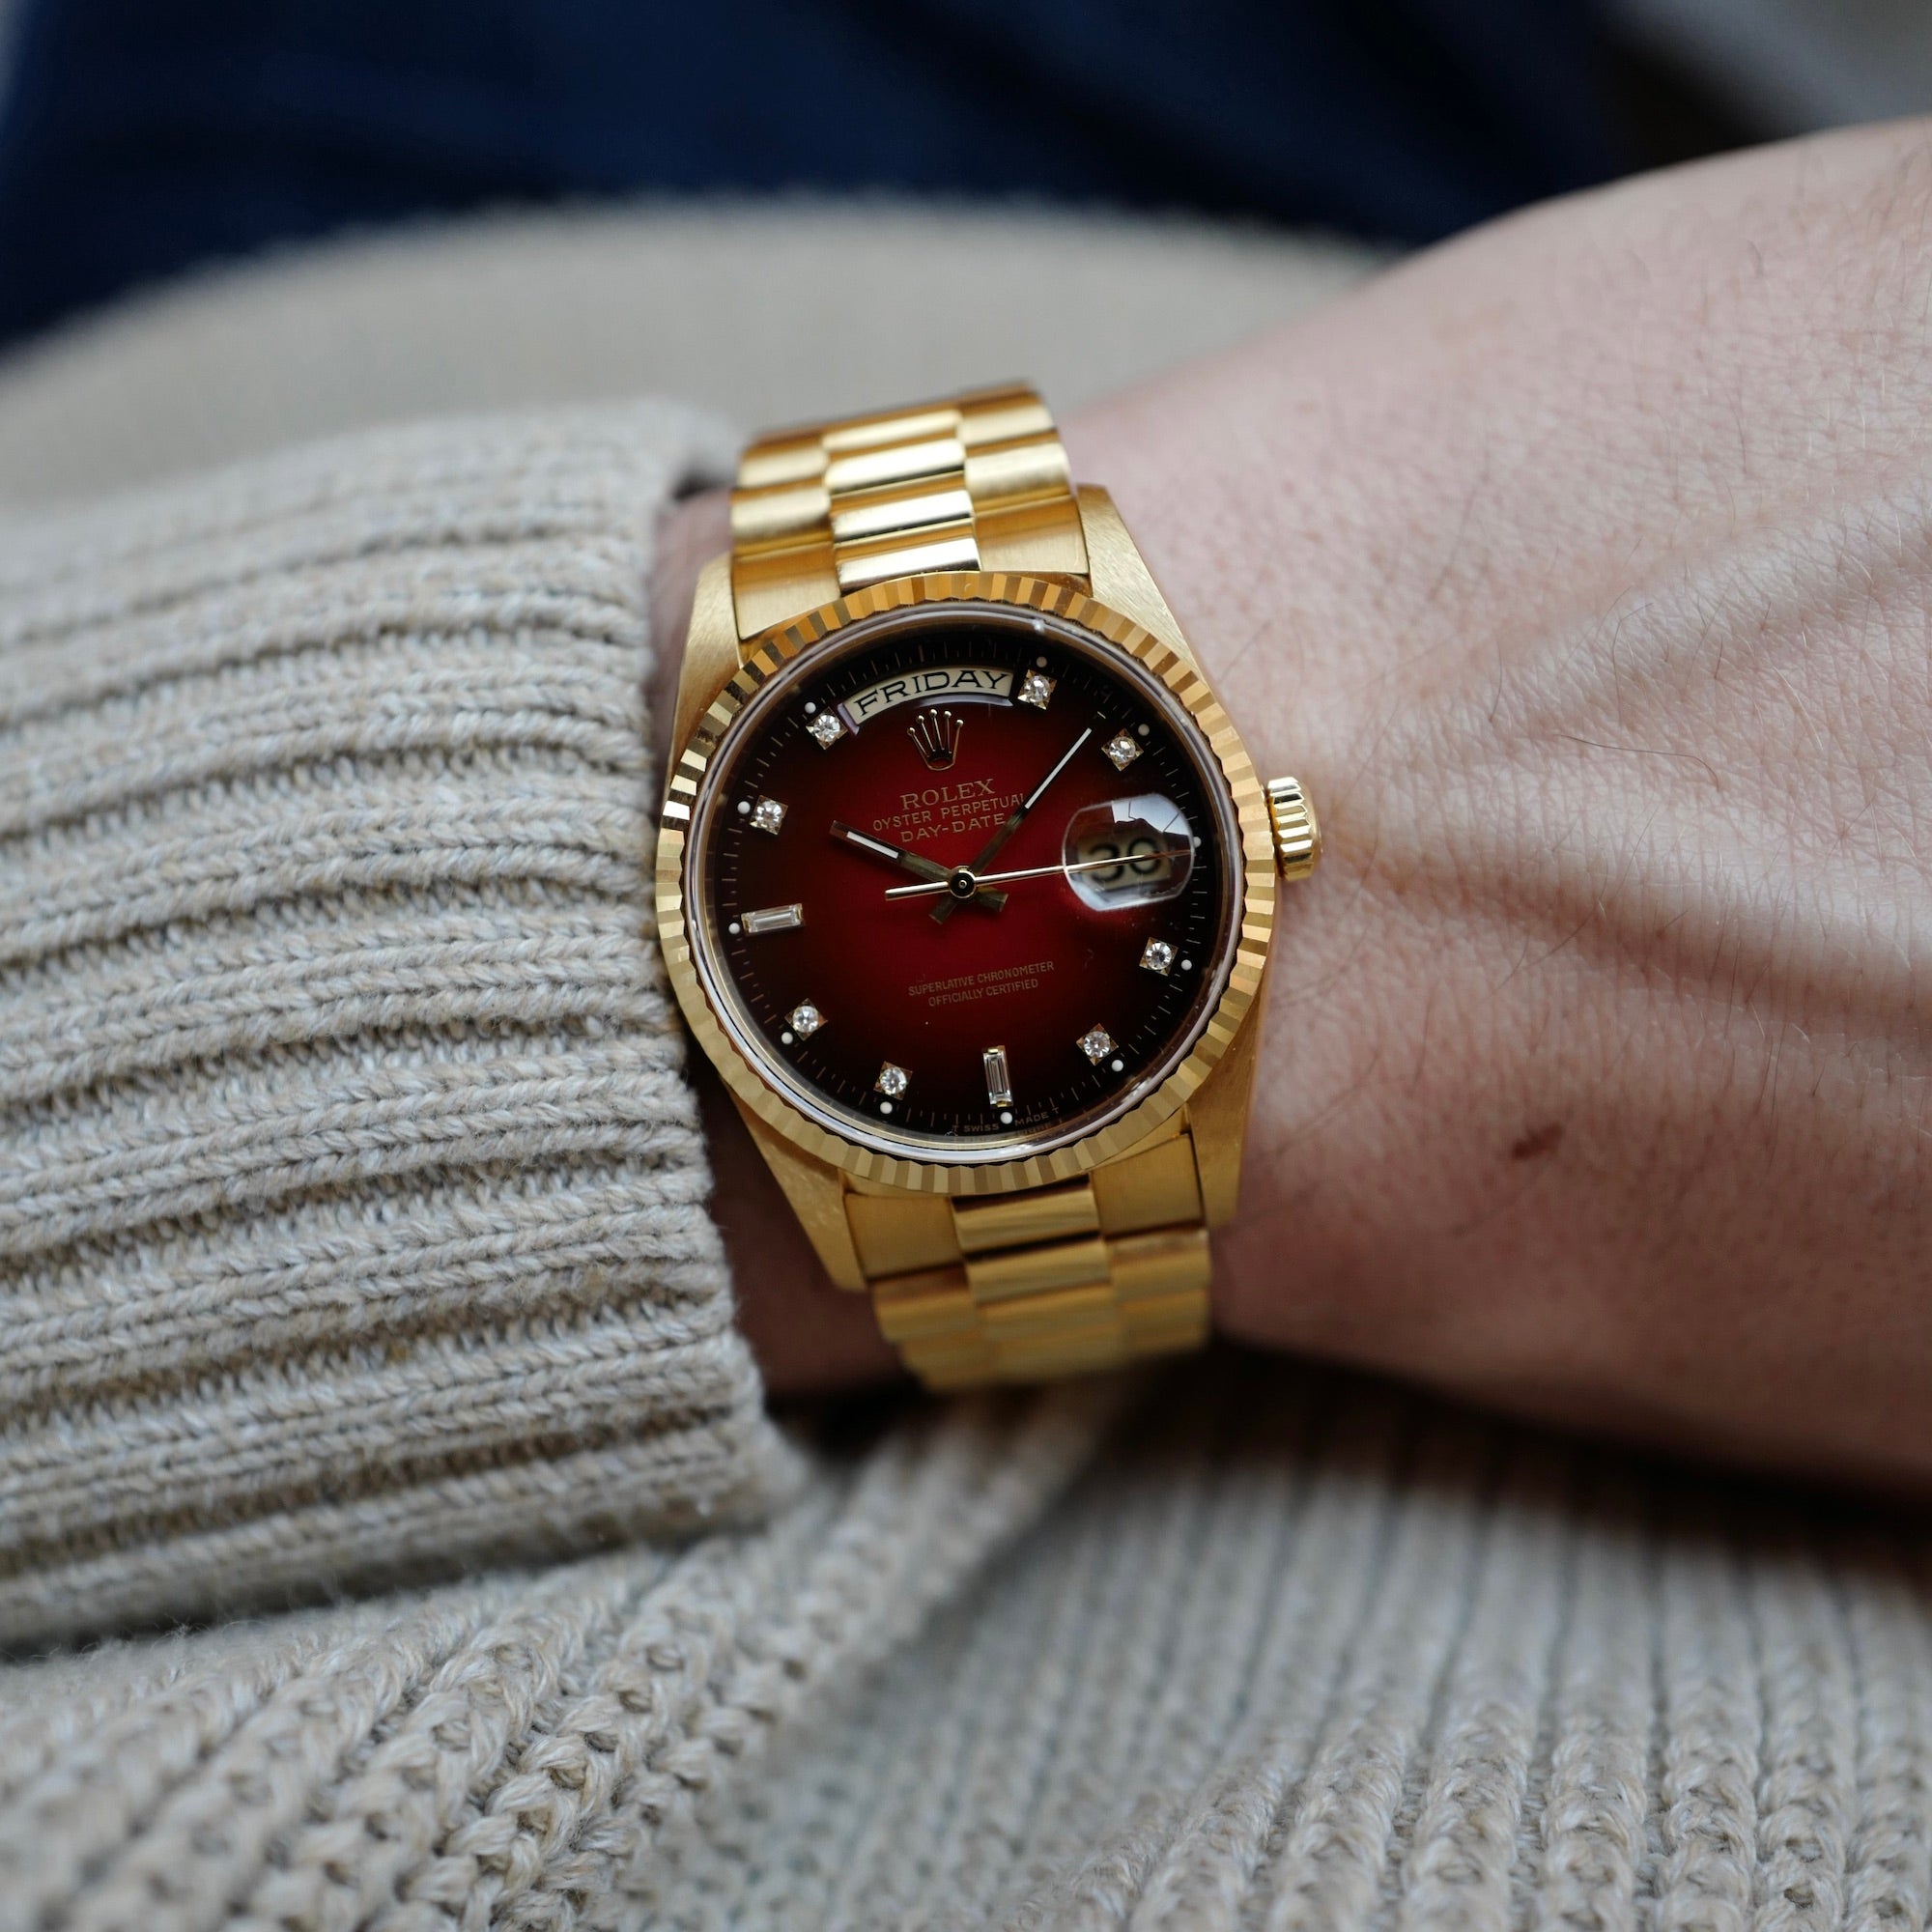 Rolex - Rolex Yeloow Gold Day Date Ref. 18238 with Red Vignette Dial - The Keystone Watches